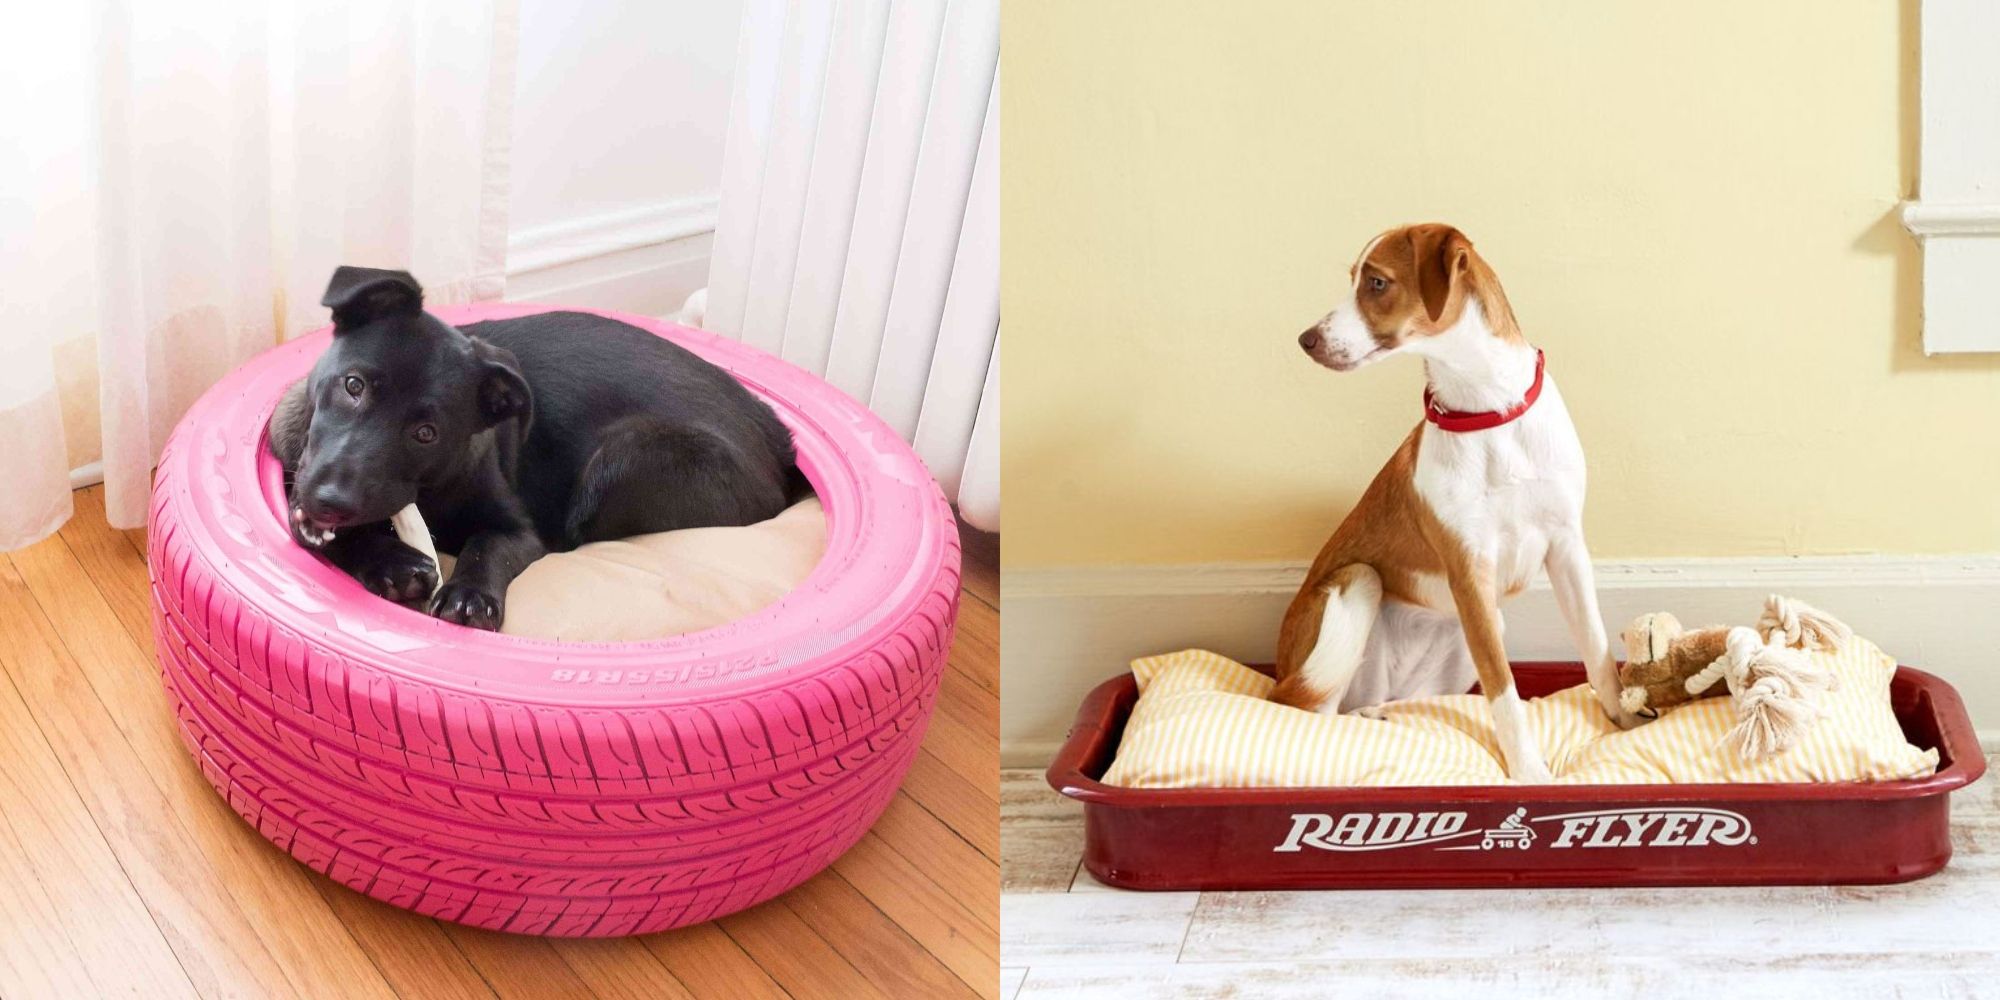 19 Adorable Diy Dog Beds How To Make, King Size Bed With Dog Bed Insert